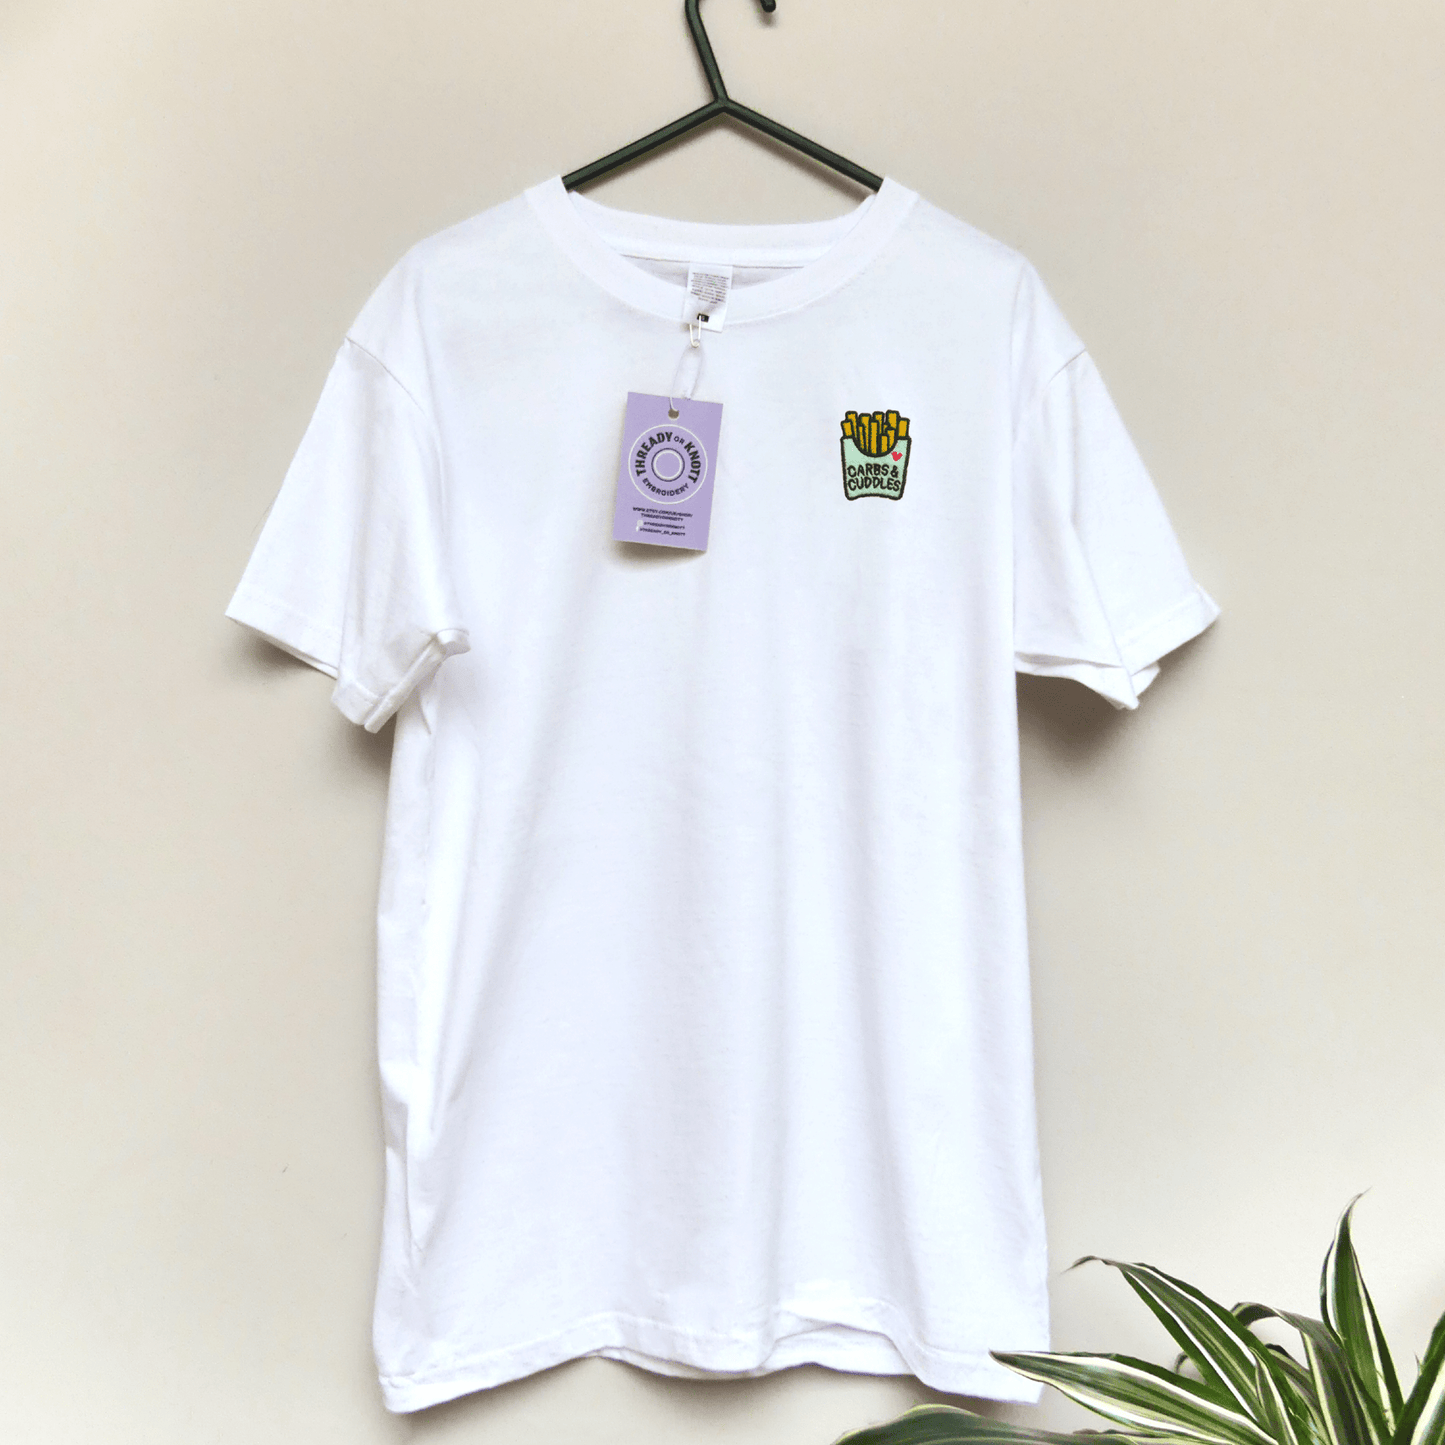 Carbs & Cuddles Embroidered T-shirts LAST OF STOCK